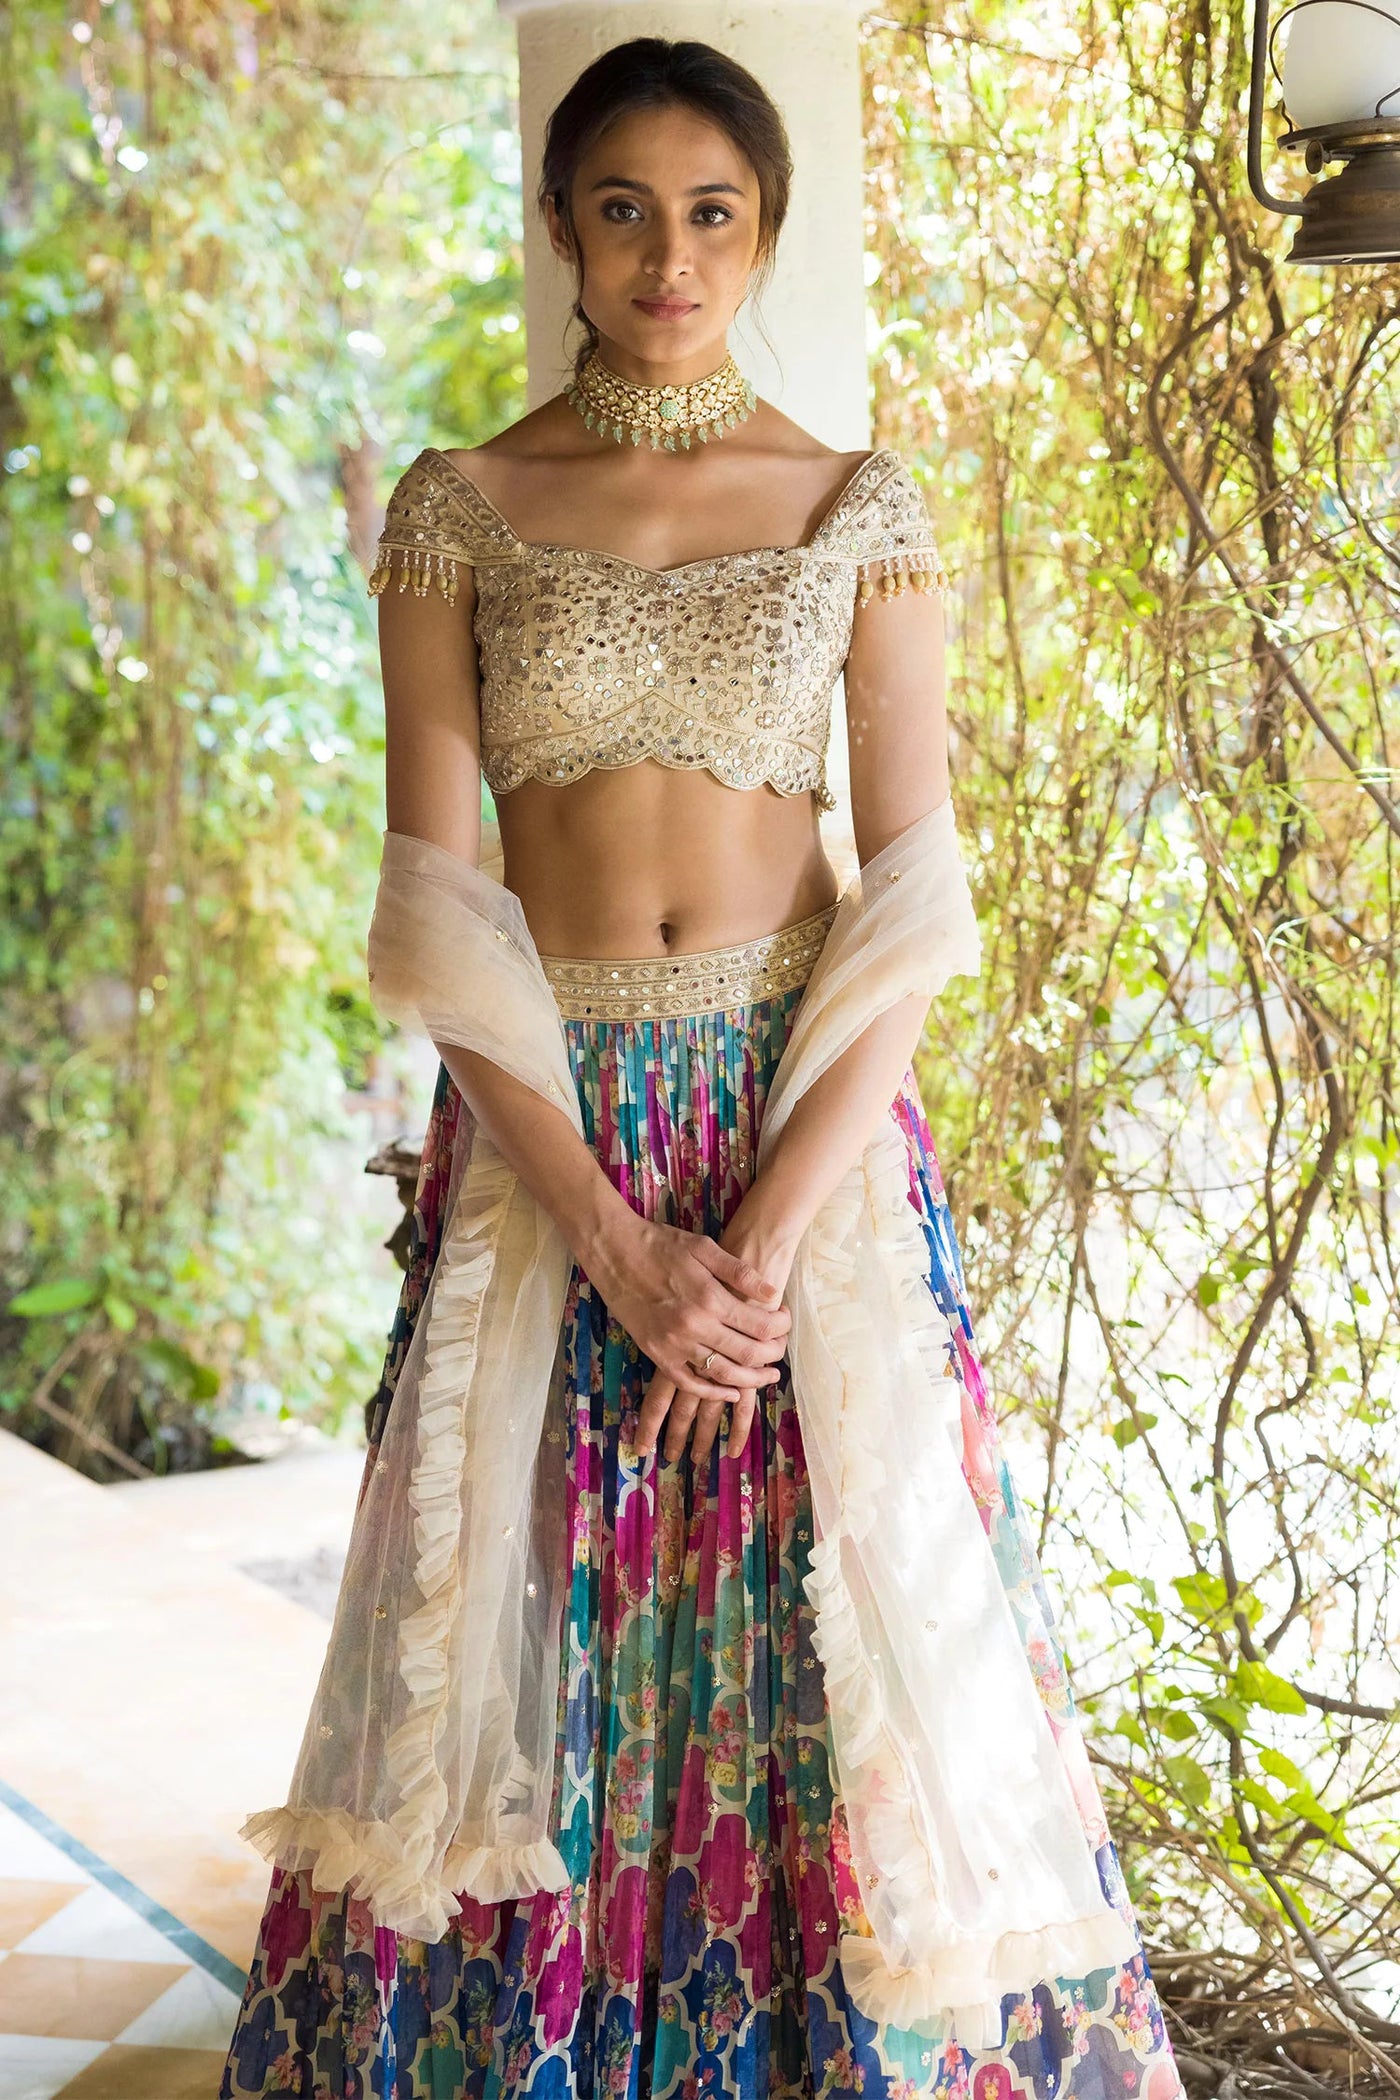 Printed Off-shoulder Lehenga Set - Indian Clothing in Denver, CO, Aurora, CO, Boulder, CO, Fort Collins, CO, Colorado Springs, CO, Parker, CO, Highlands Ranch, CO, Cherry Creek, CO, Centennial, CO, and Longmont, CO. Nationwide shipping USA - India Fashion X